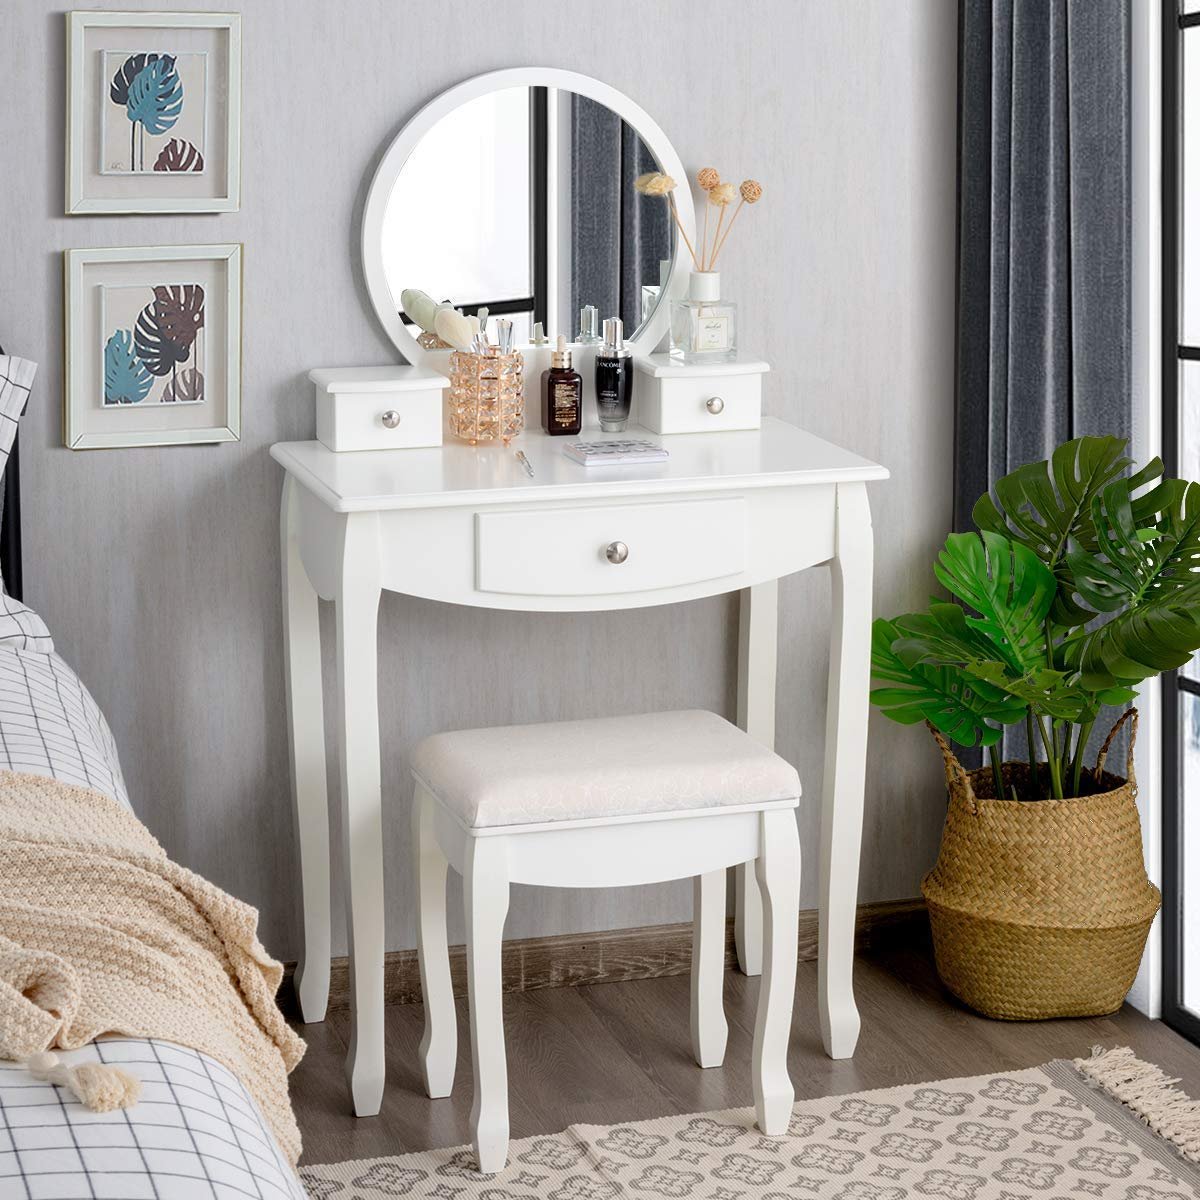 Ithaca Circular Mirror Wooden  Dressing Table with Drawer Storage – White